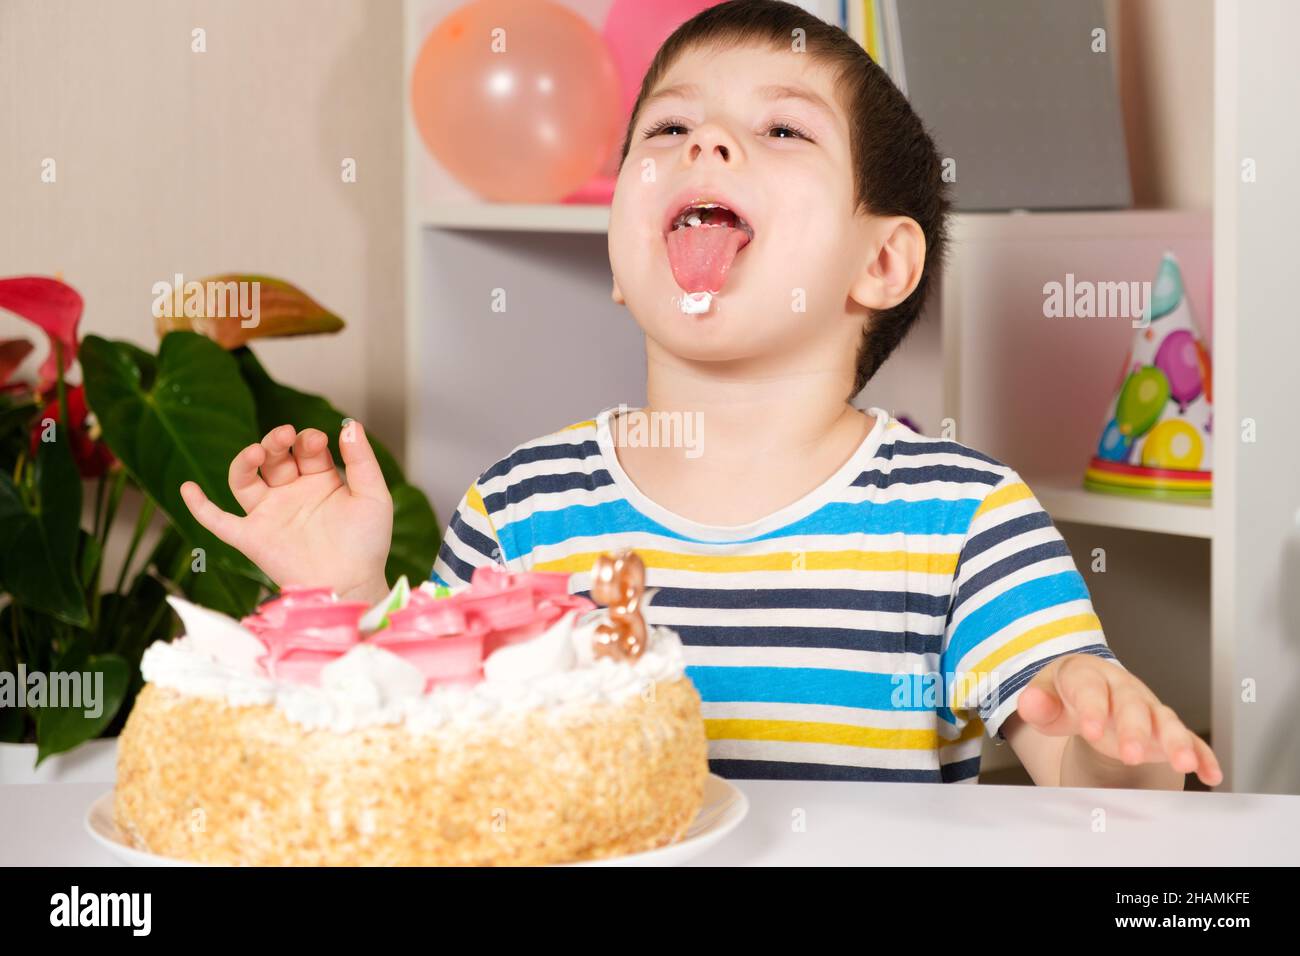 The child celebrates a birthday, laughs and licks, eats a birthday cake. Stock Photo